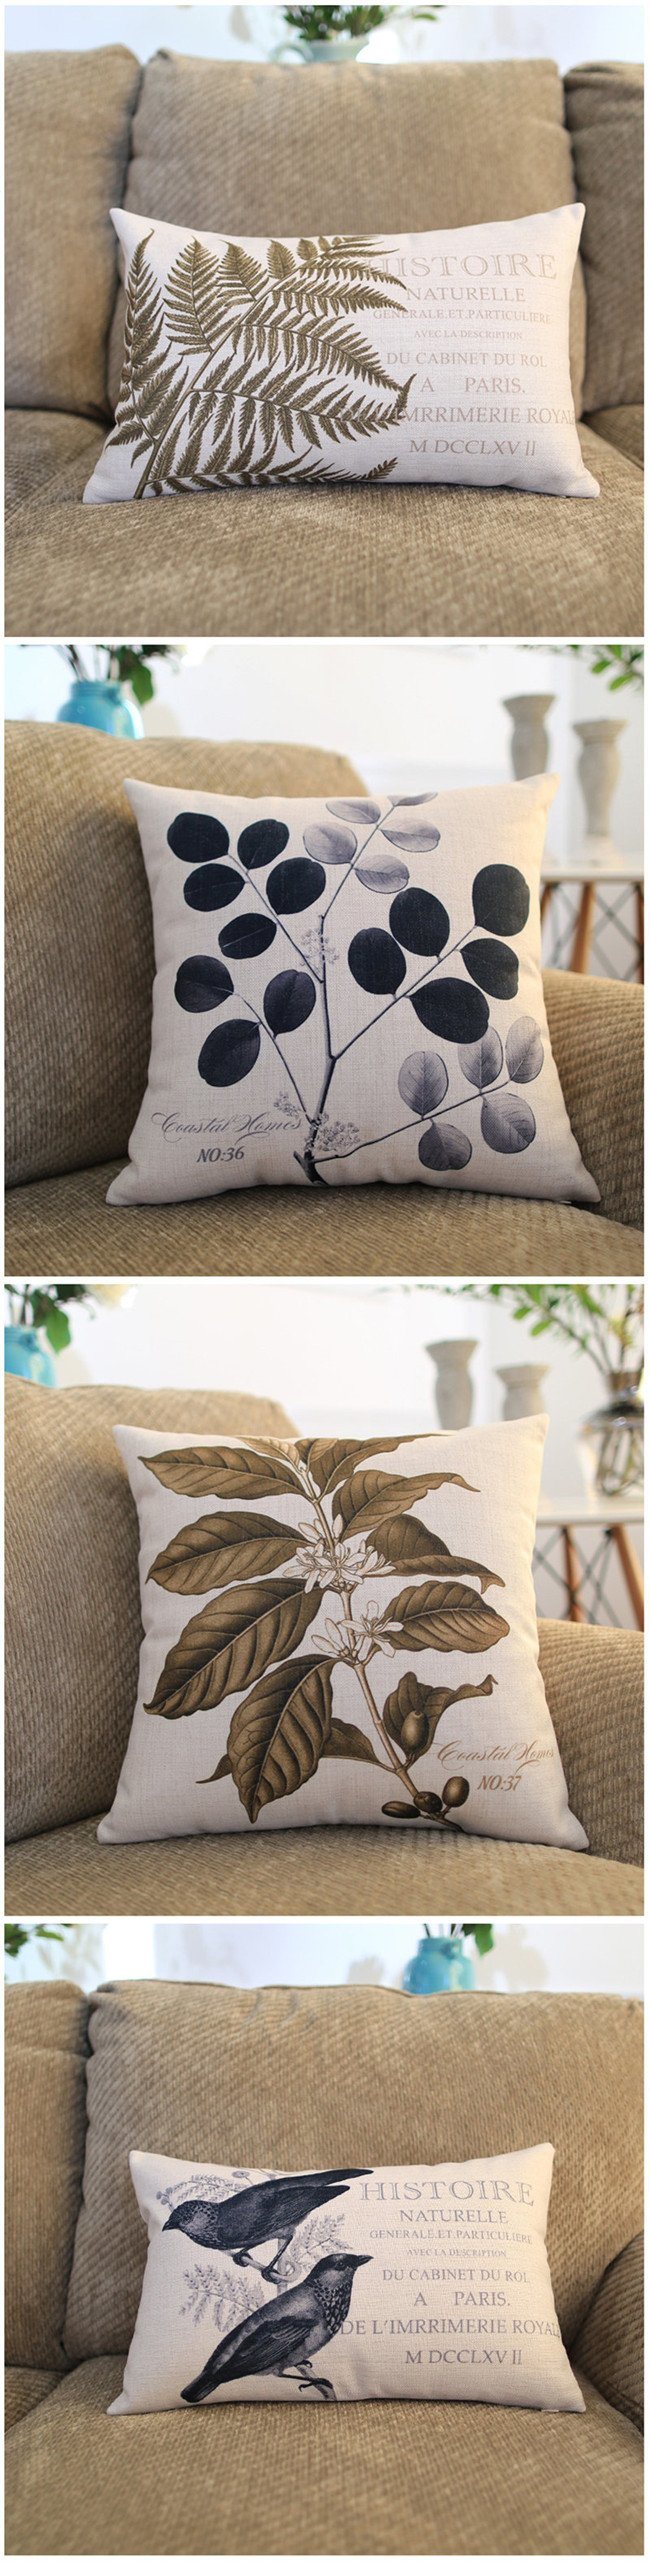 Yrf Soft Low Price Printed Cotton Linen Pillows Couch Bed Pillow